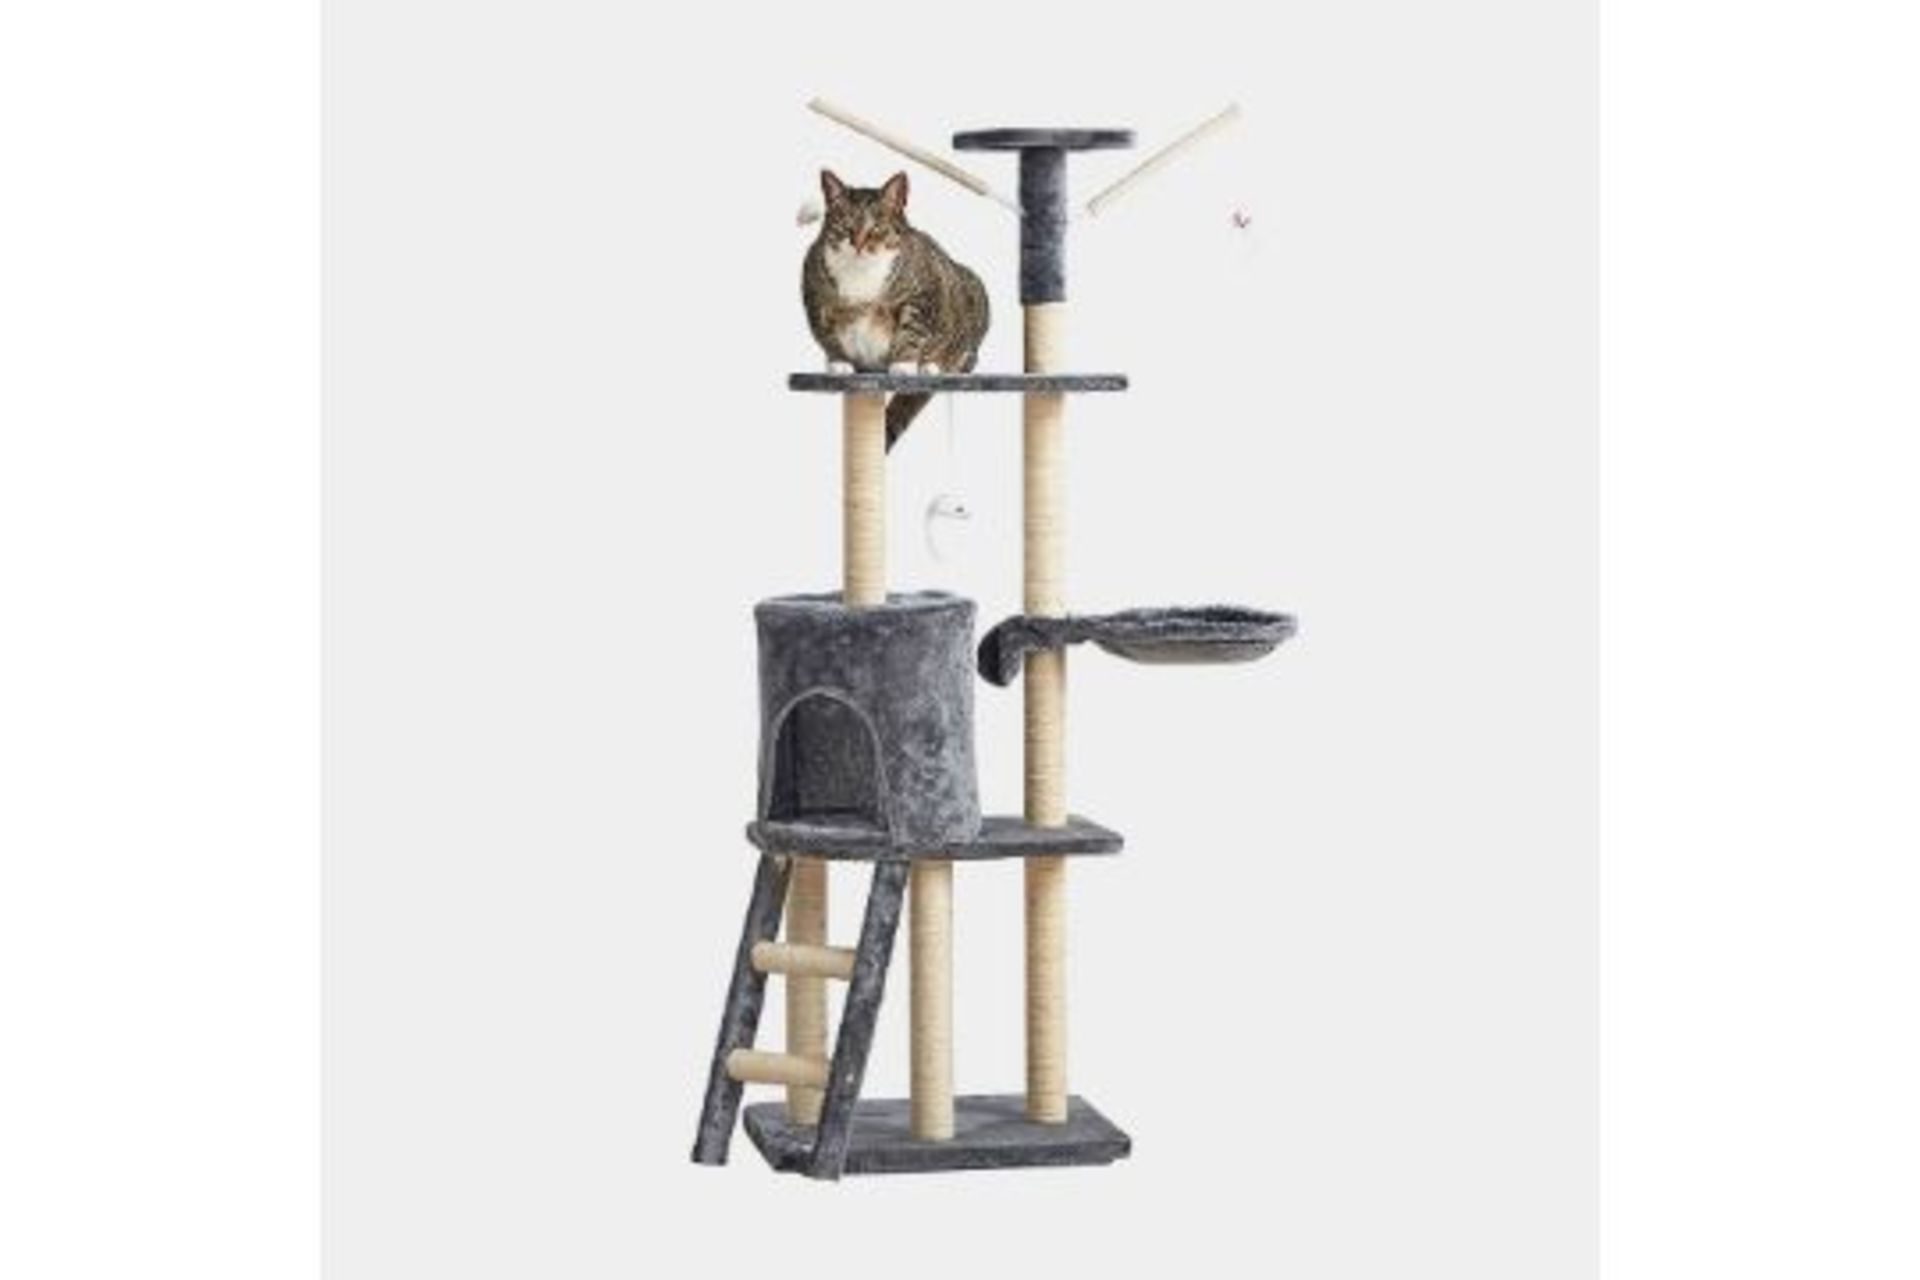 (22/221)Cat Tree. BI. Purrrfect for scratching, stretching, exercising, or enjoying a peaceful cat